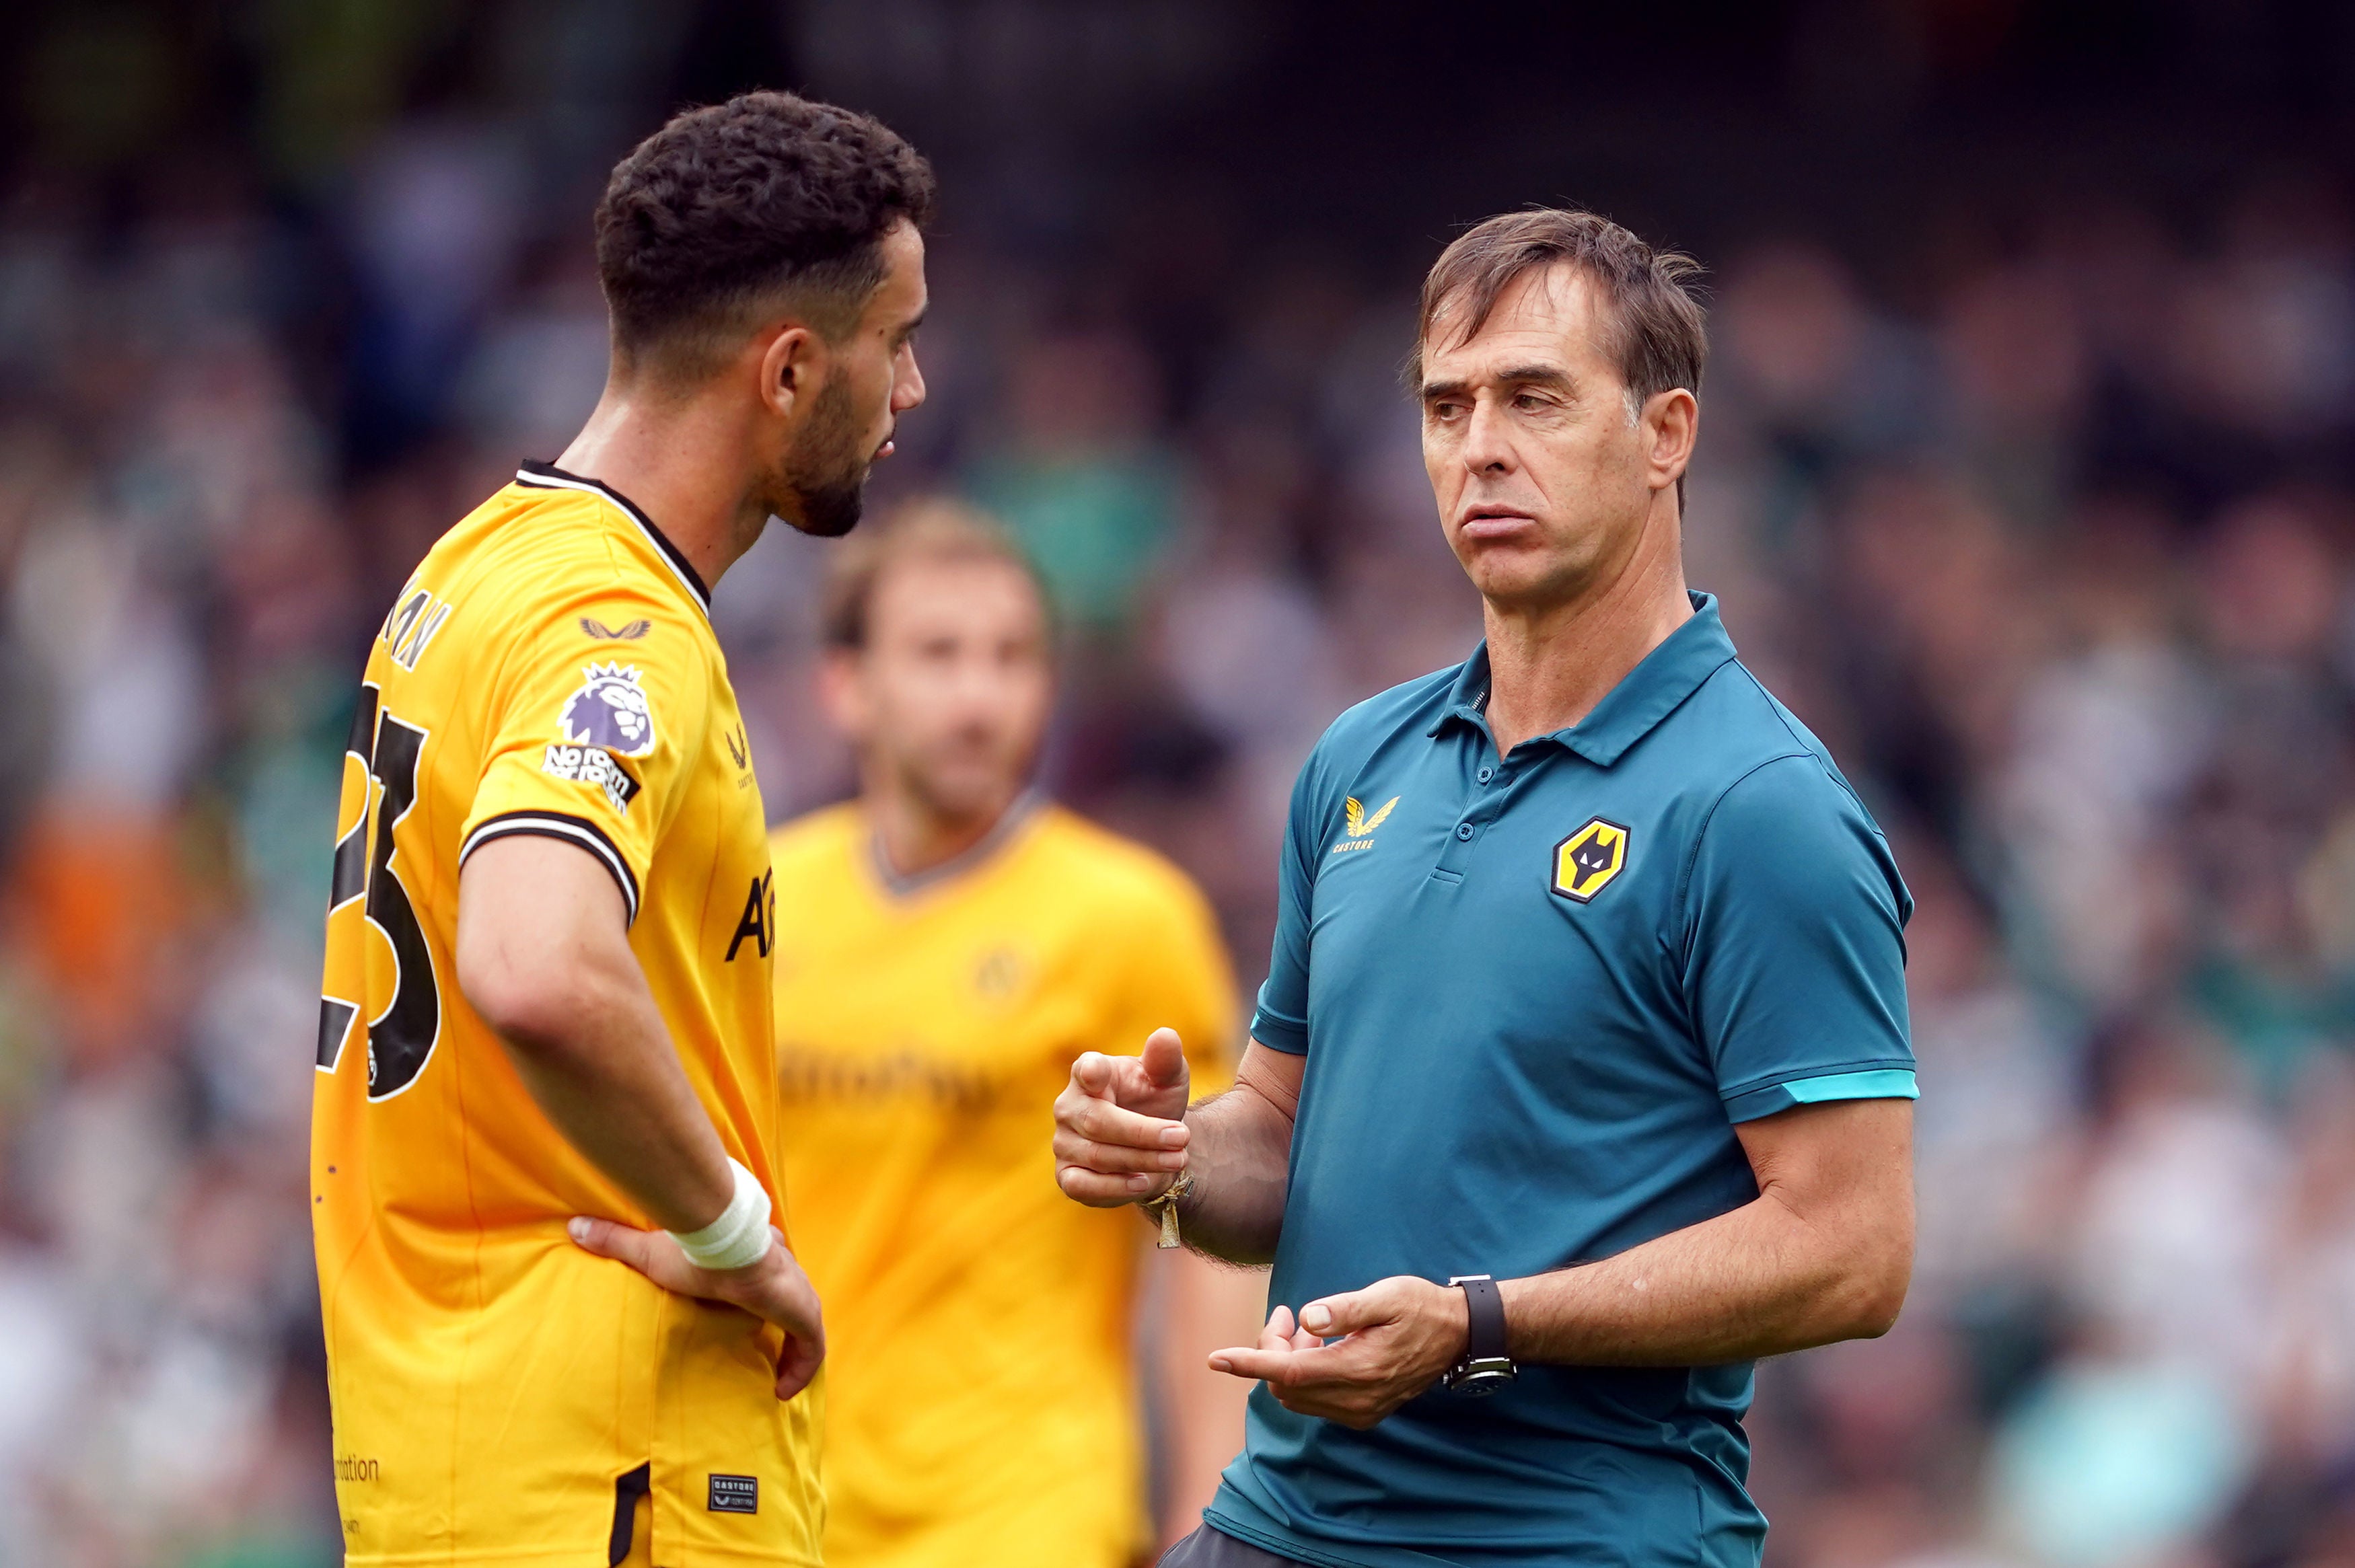 Lopetegui was unable to come to terms with the lack of transfer investment from the Wolves board